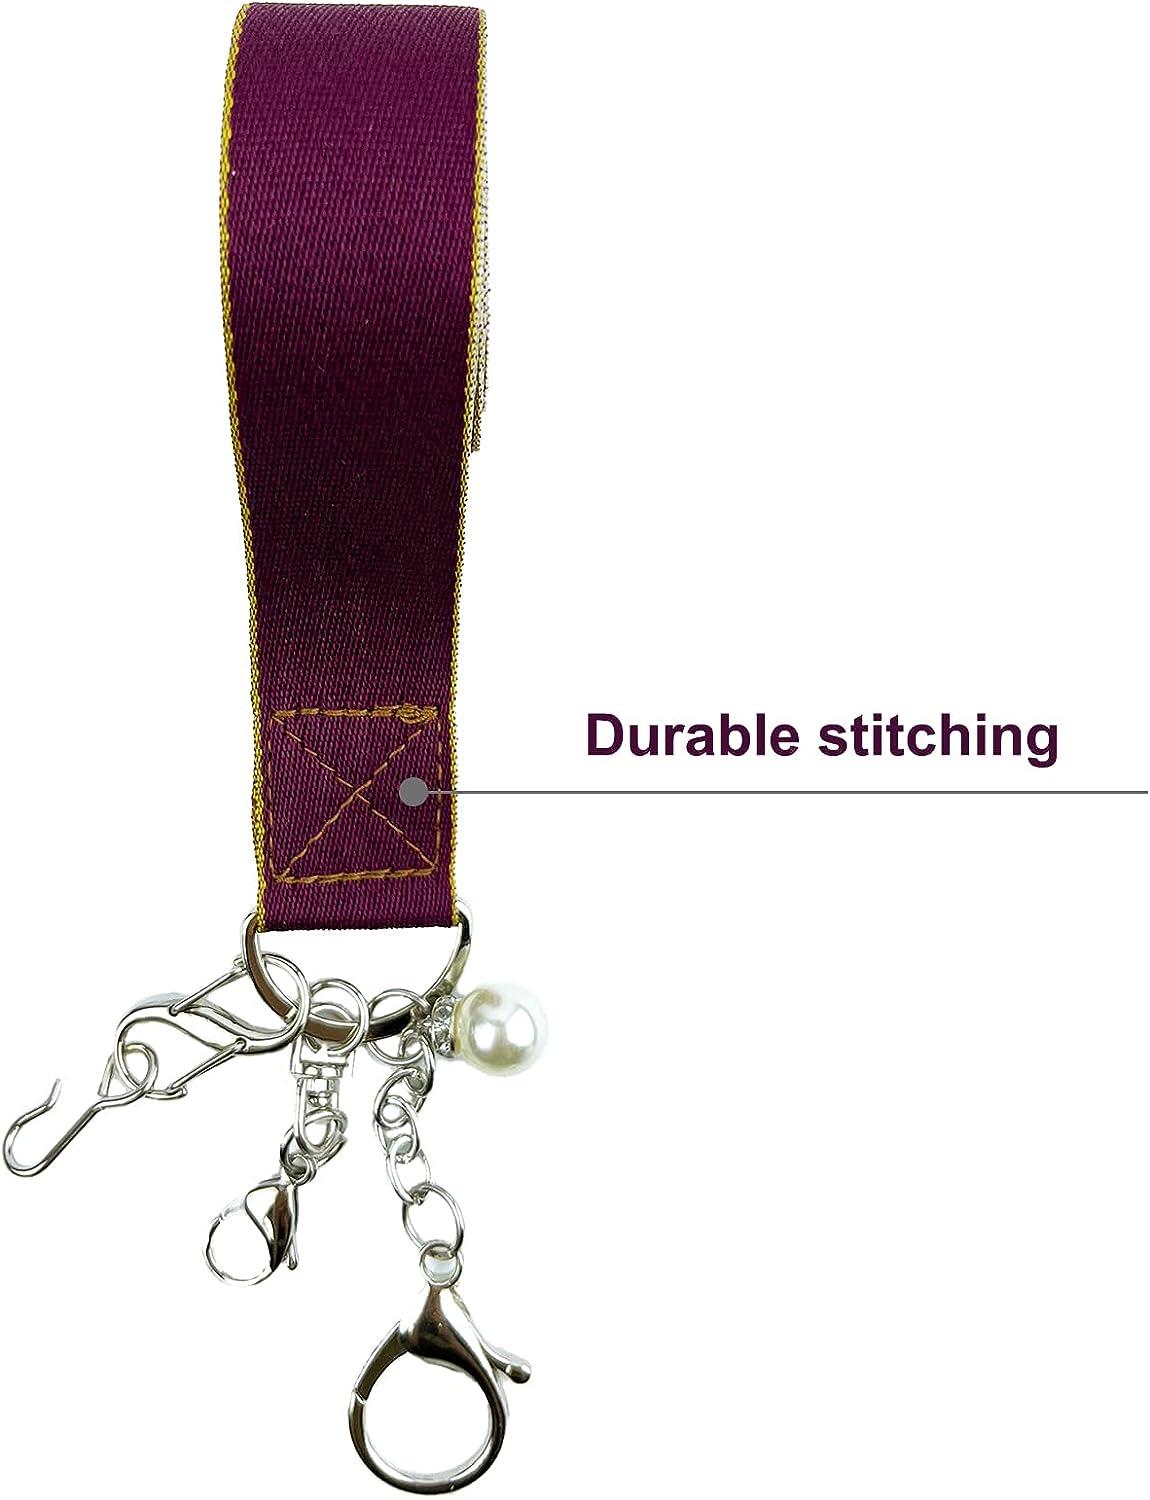 Zipper Helper Pull for Dresses - with 3 Different Types of Hooks